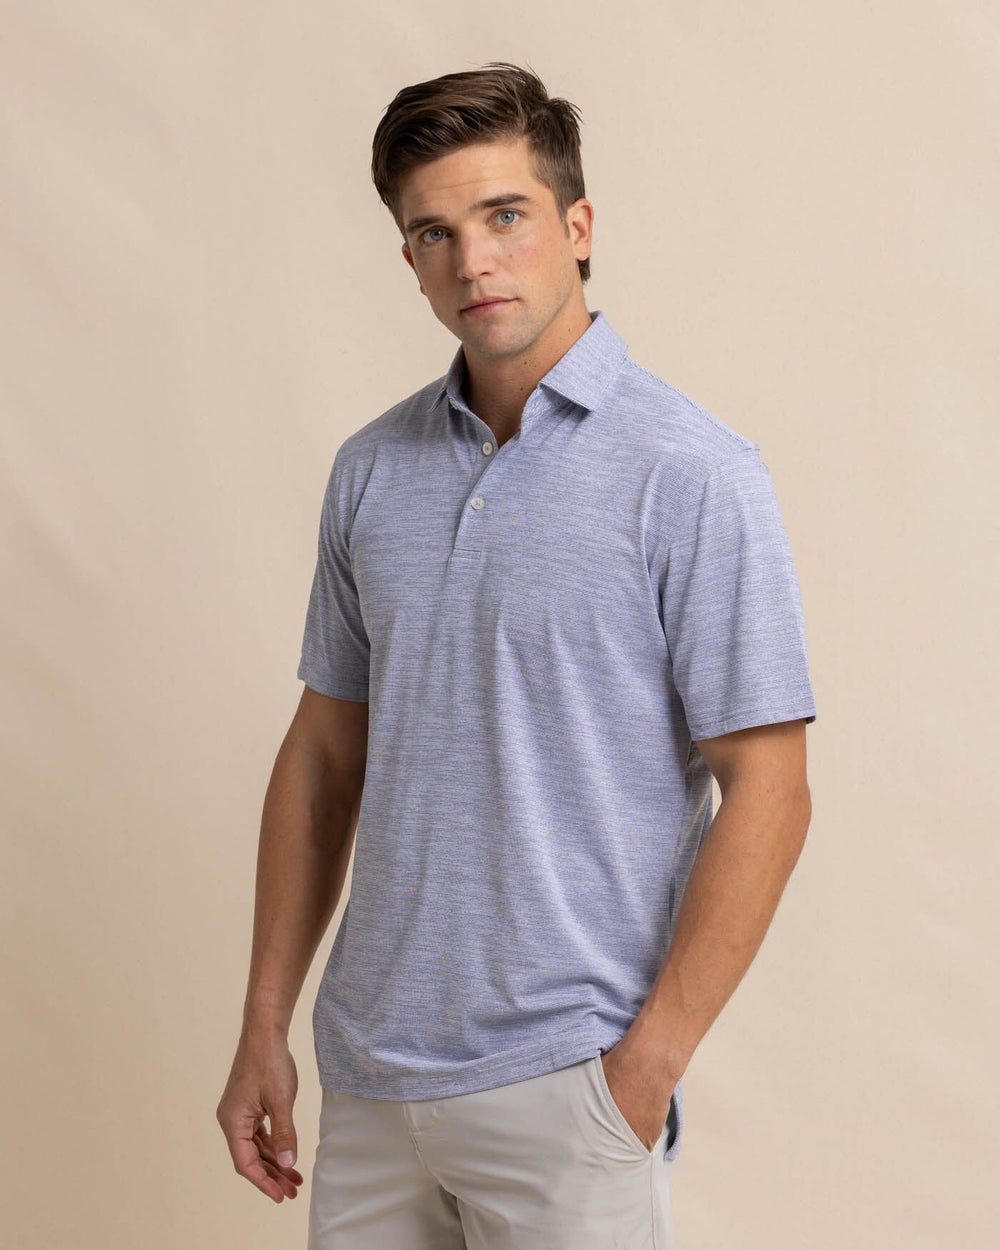 The front view of the Southern Tide Team Colors Driver Spacedye Polo Shirt by Southern Tide - Navy